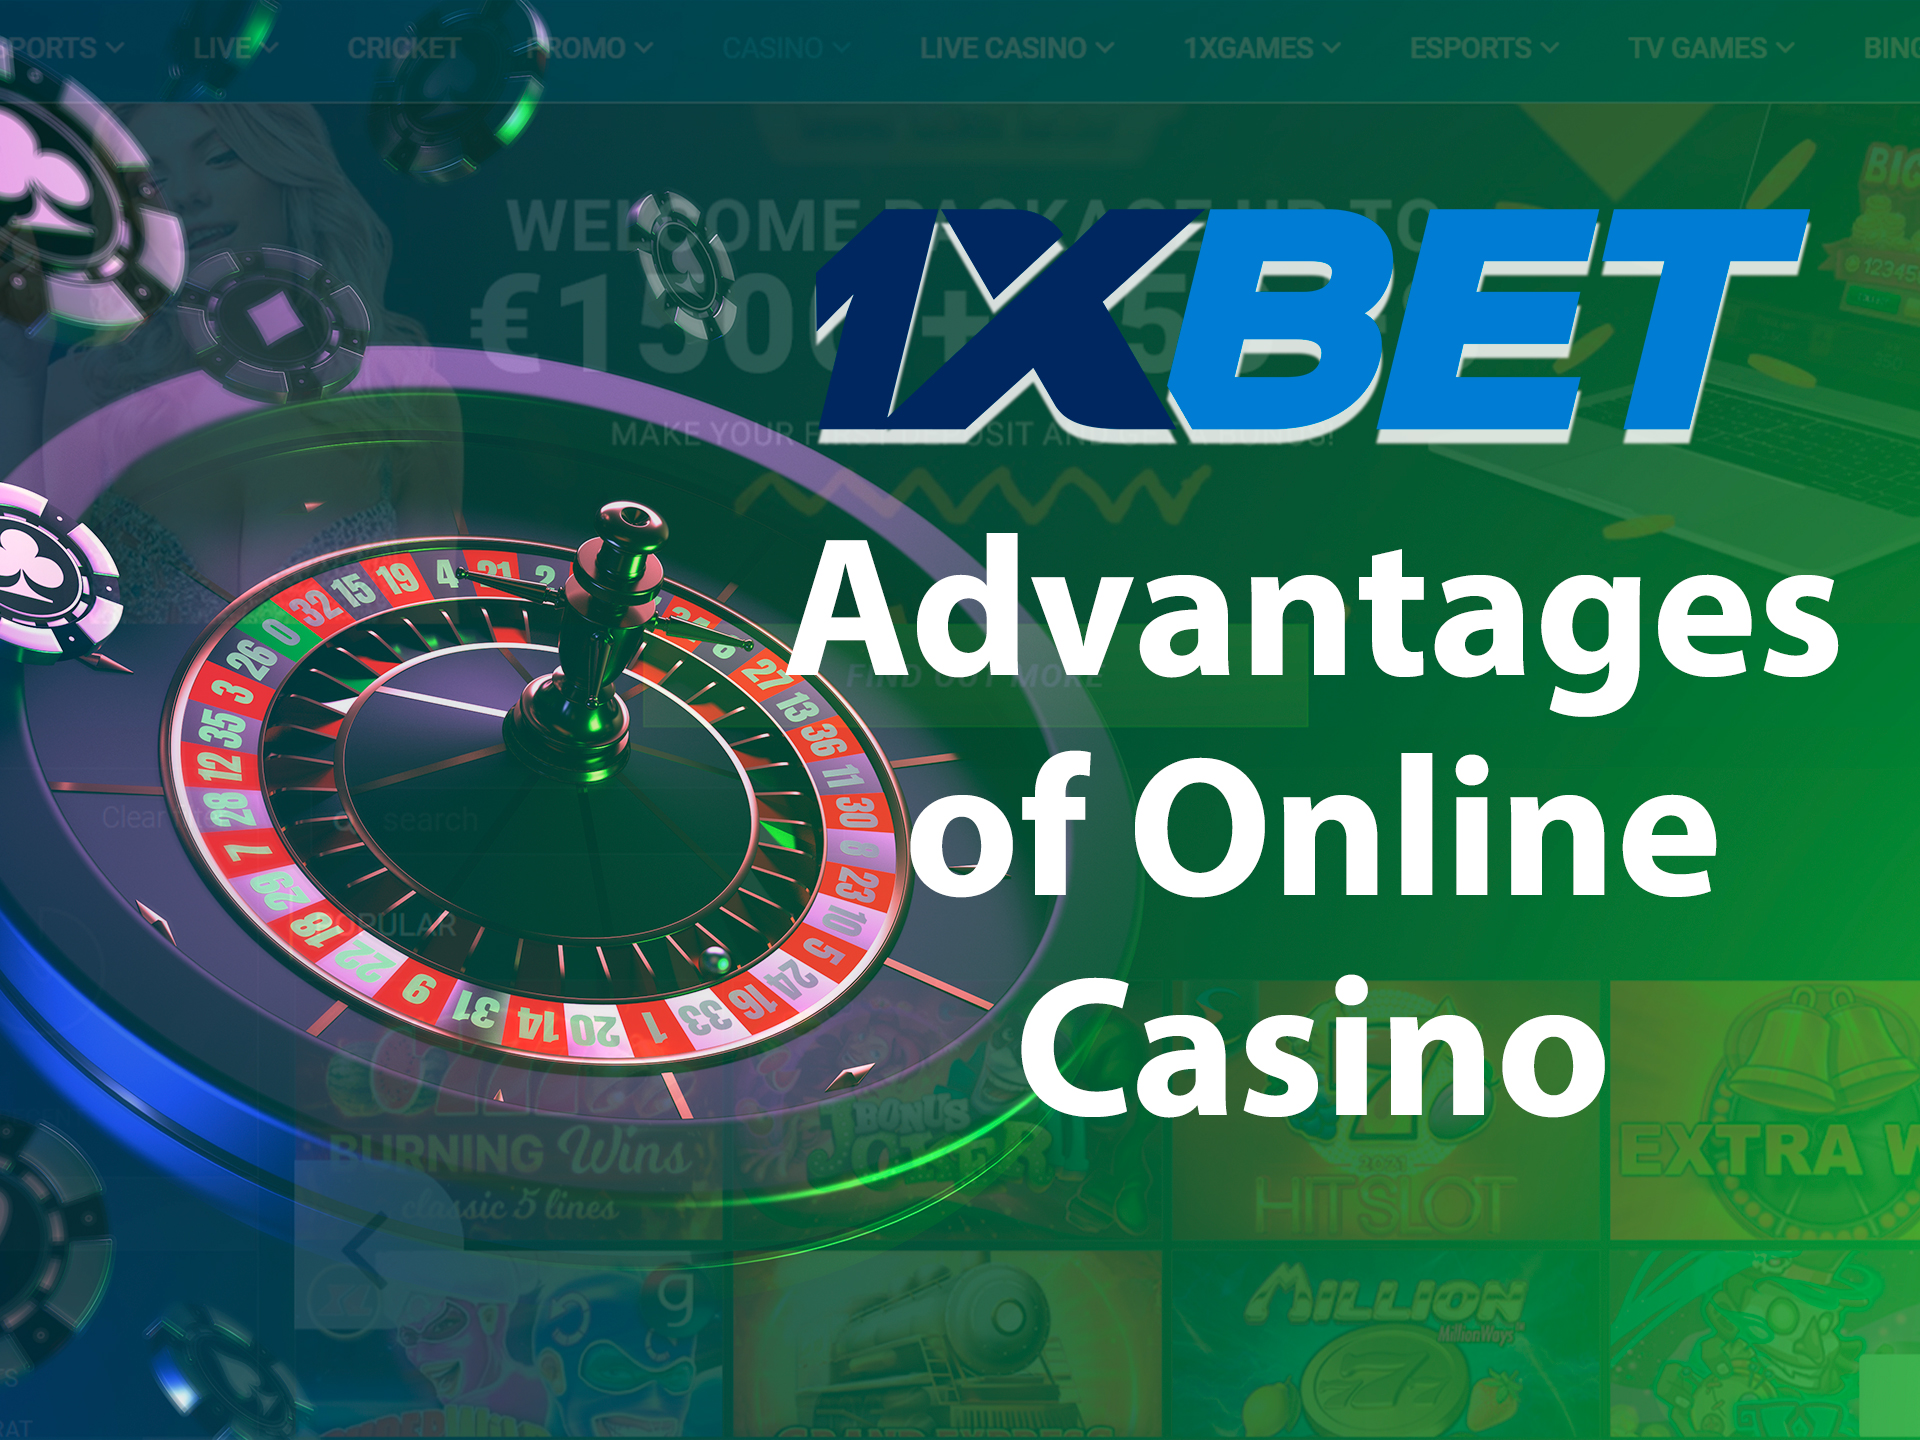 1xbet online casino has all the advantages to play games with ease and comfort.